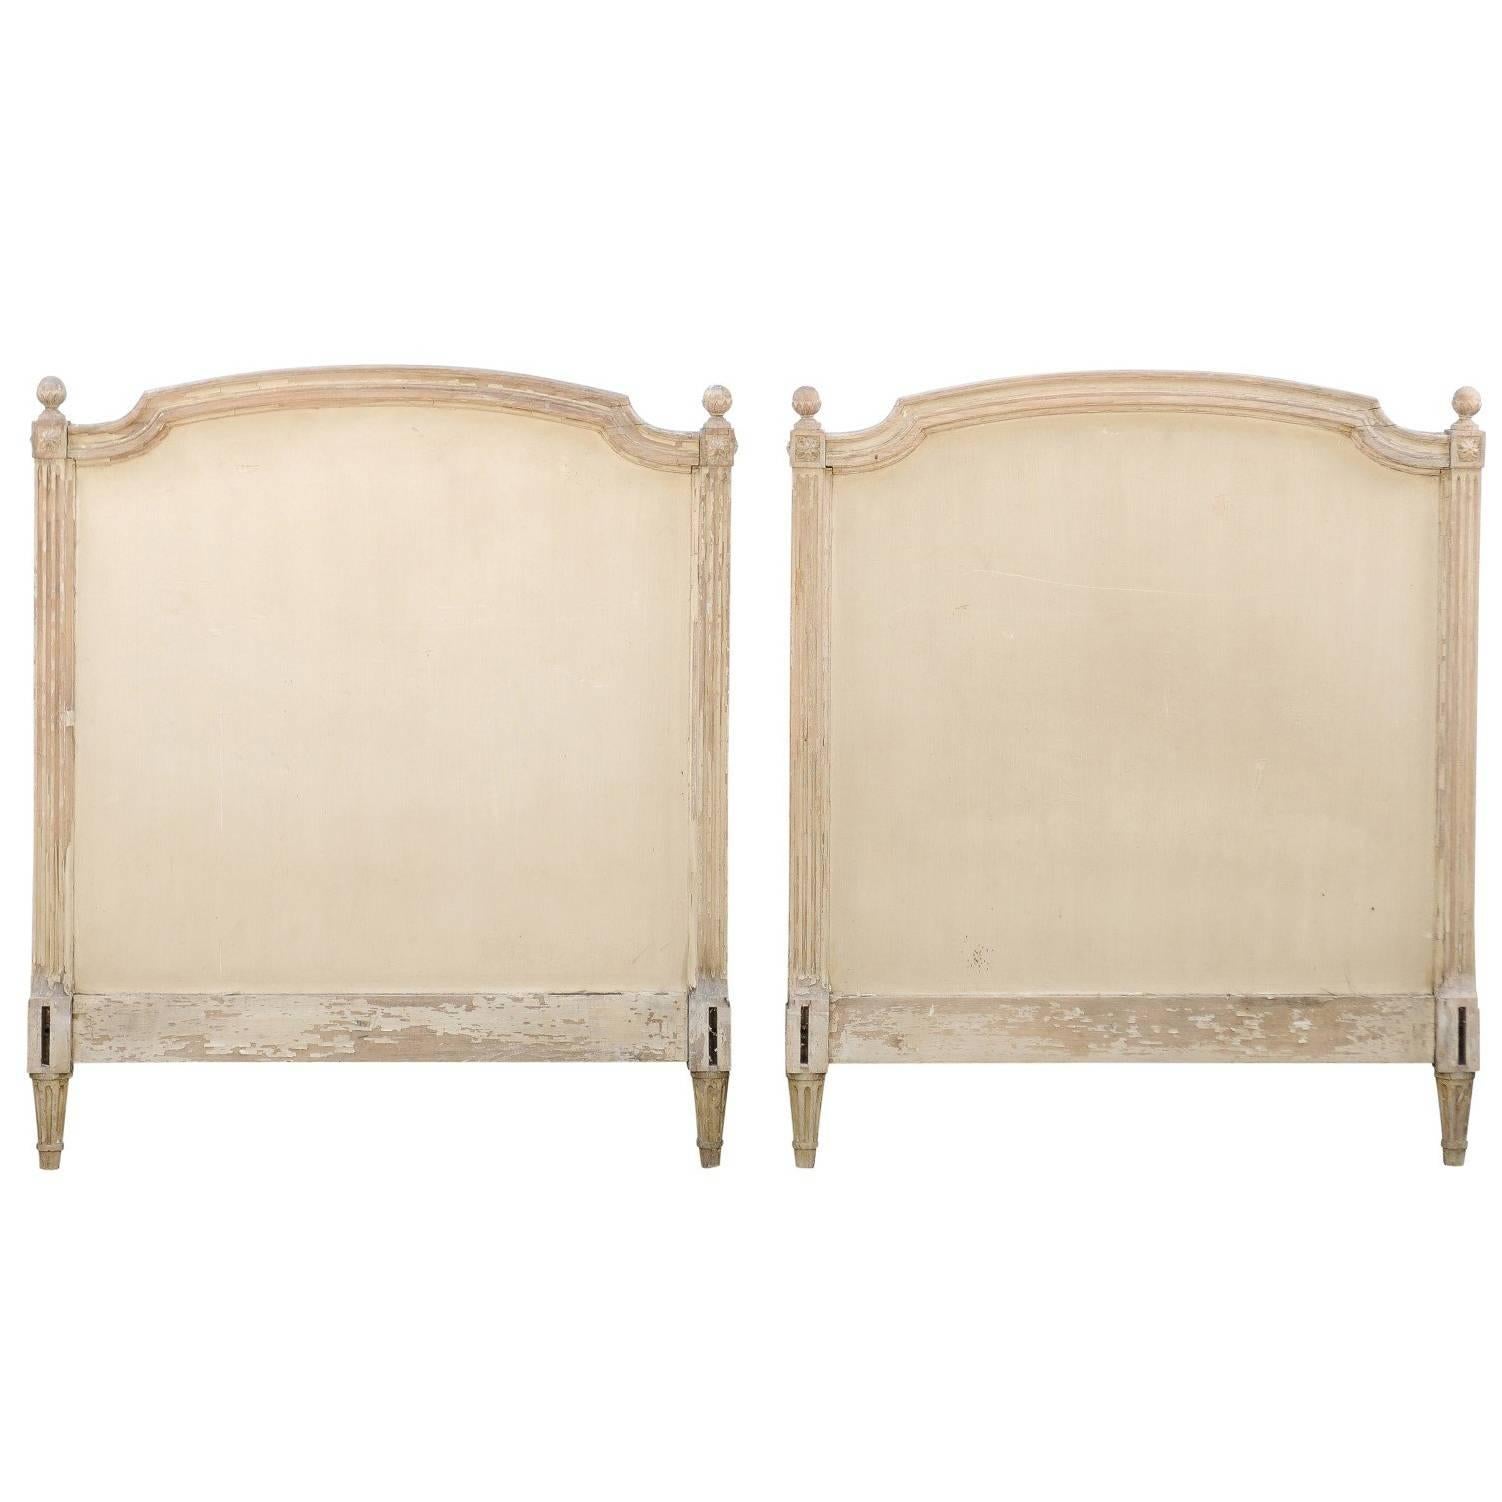 Pair of French Louis XVI Style Twin Bed Striped Wood Headboards, 19th Century